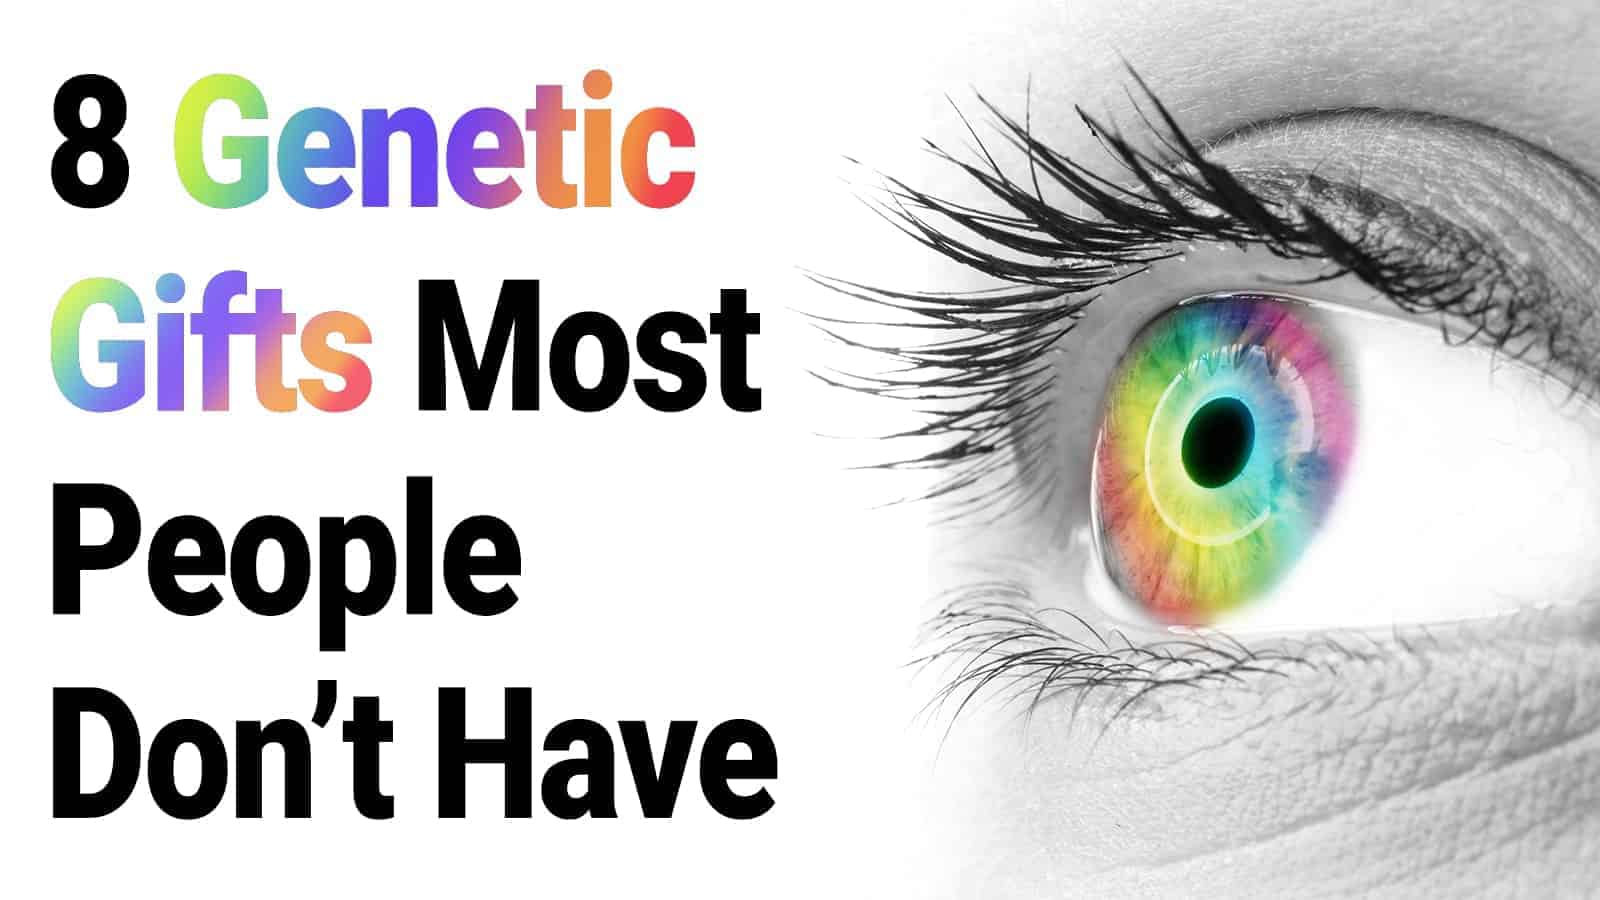 8 Genetic Gifts Most People Don’t Have